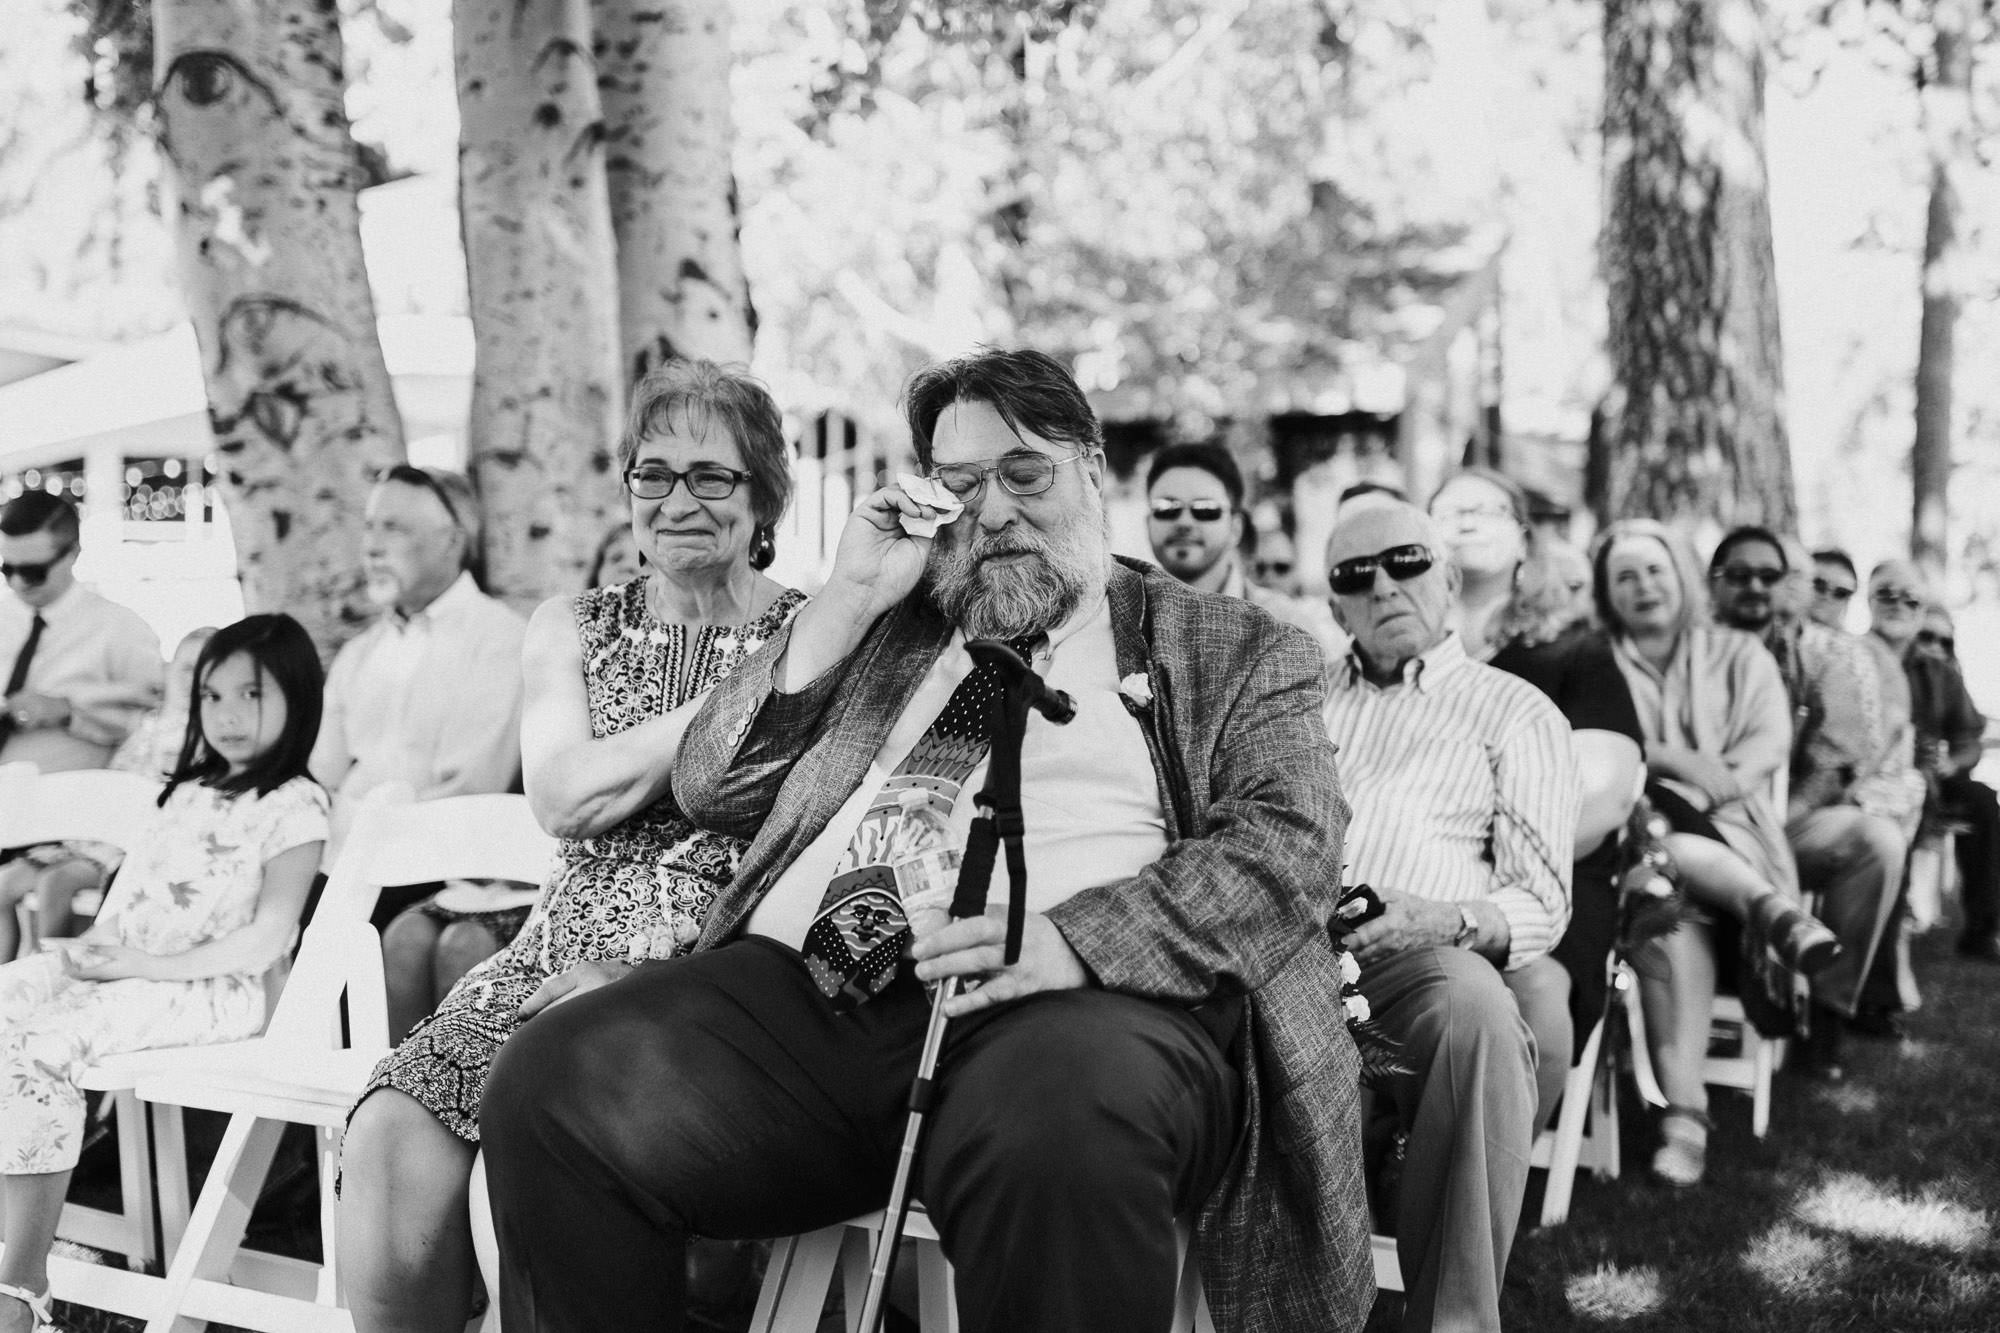 A father wipes tears from his face at a wedding ceremony at Black Butte Ranch in Oregon